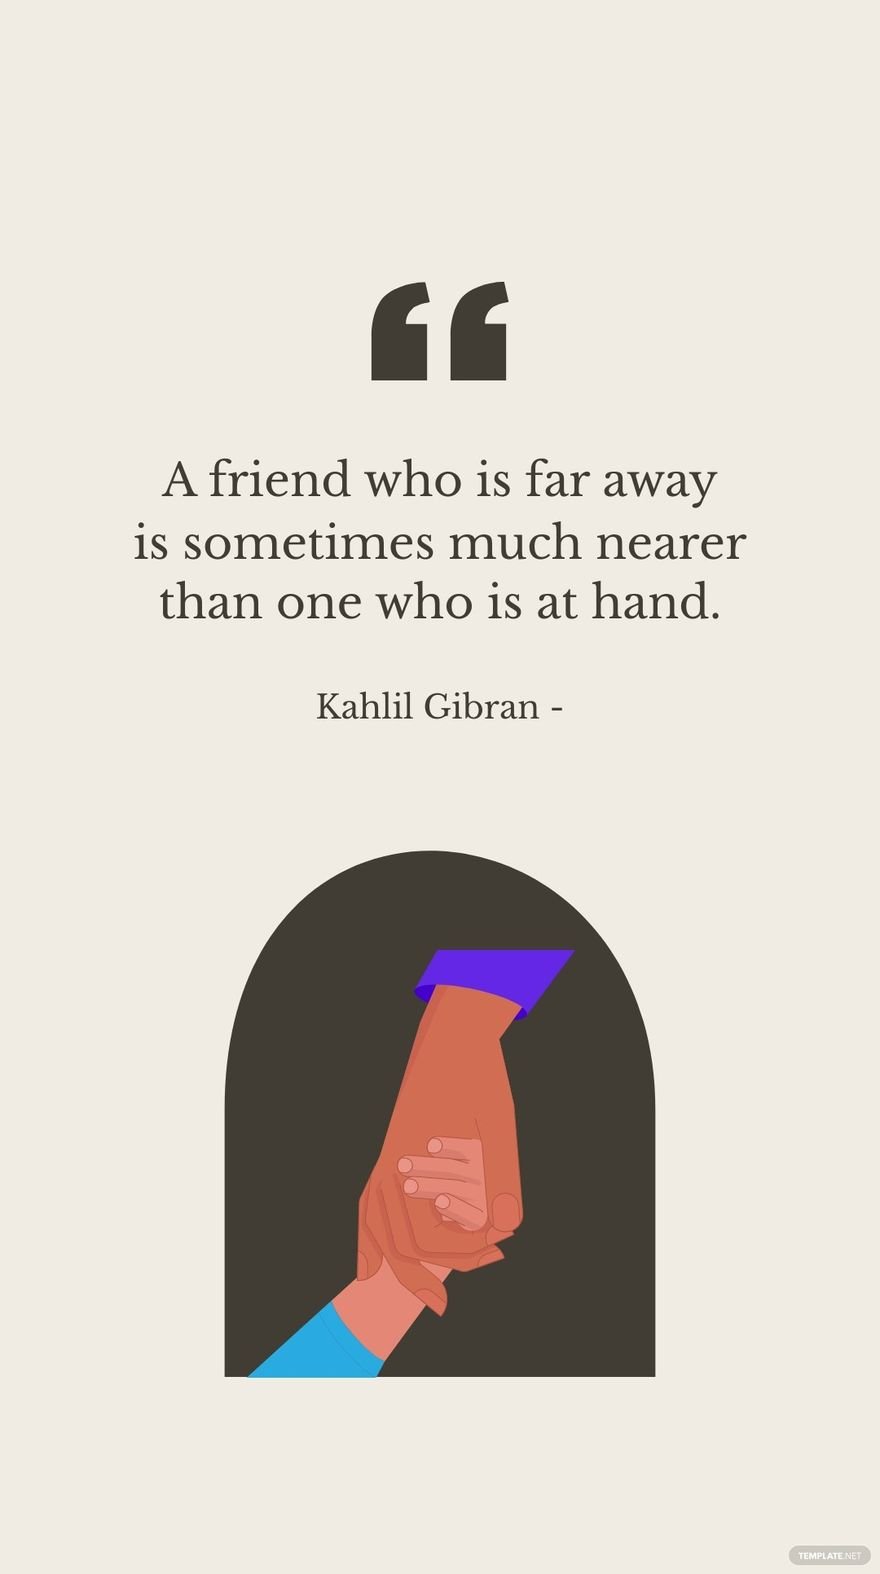 Kahlil Gibran - A friend who is far away is sometimes much nearer than one who is at hand.